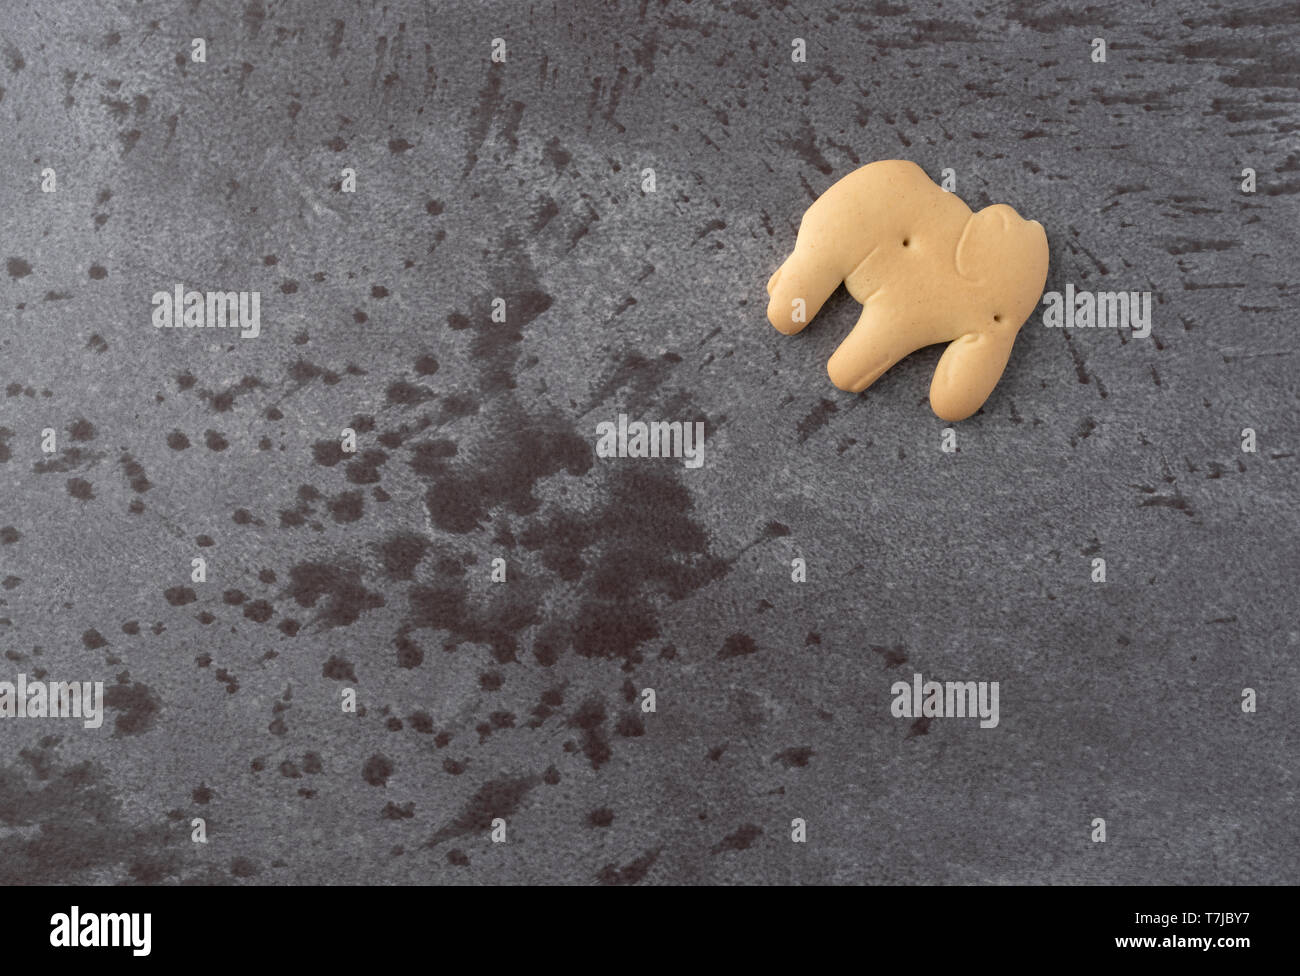 Top view of a elephant shaped animal cracker on a gray background illuminated with natural lighting. Stock Photo